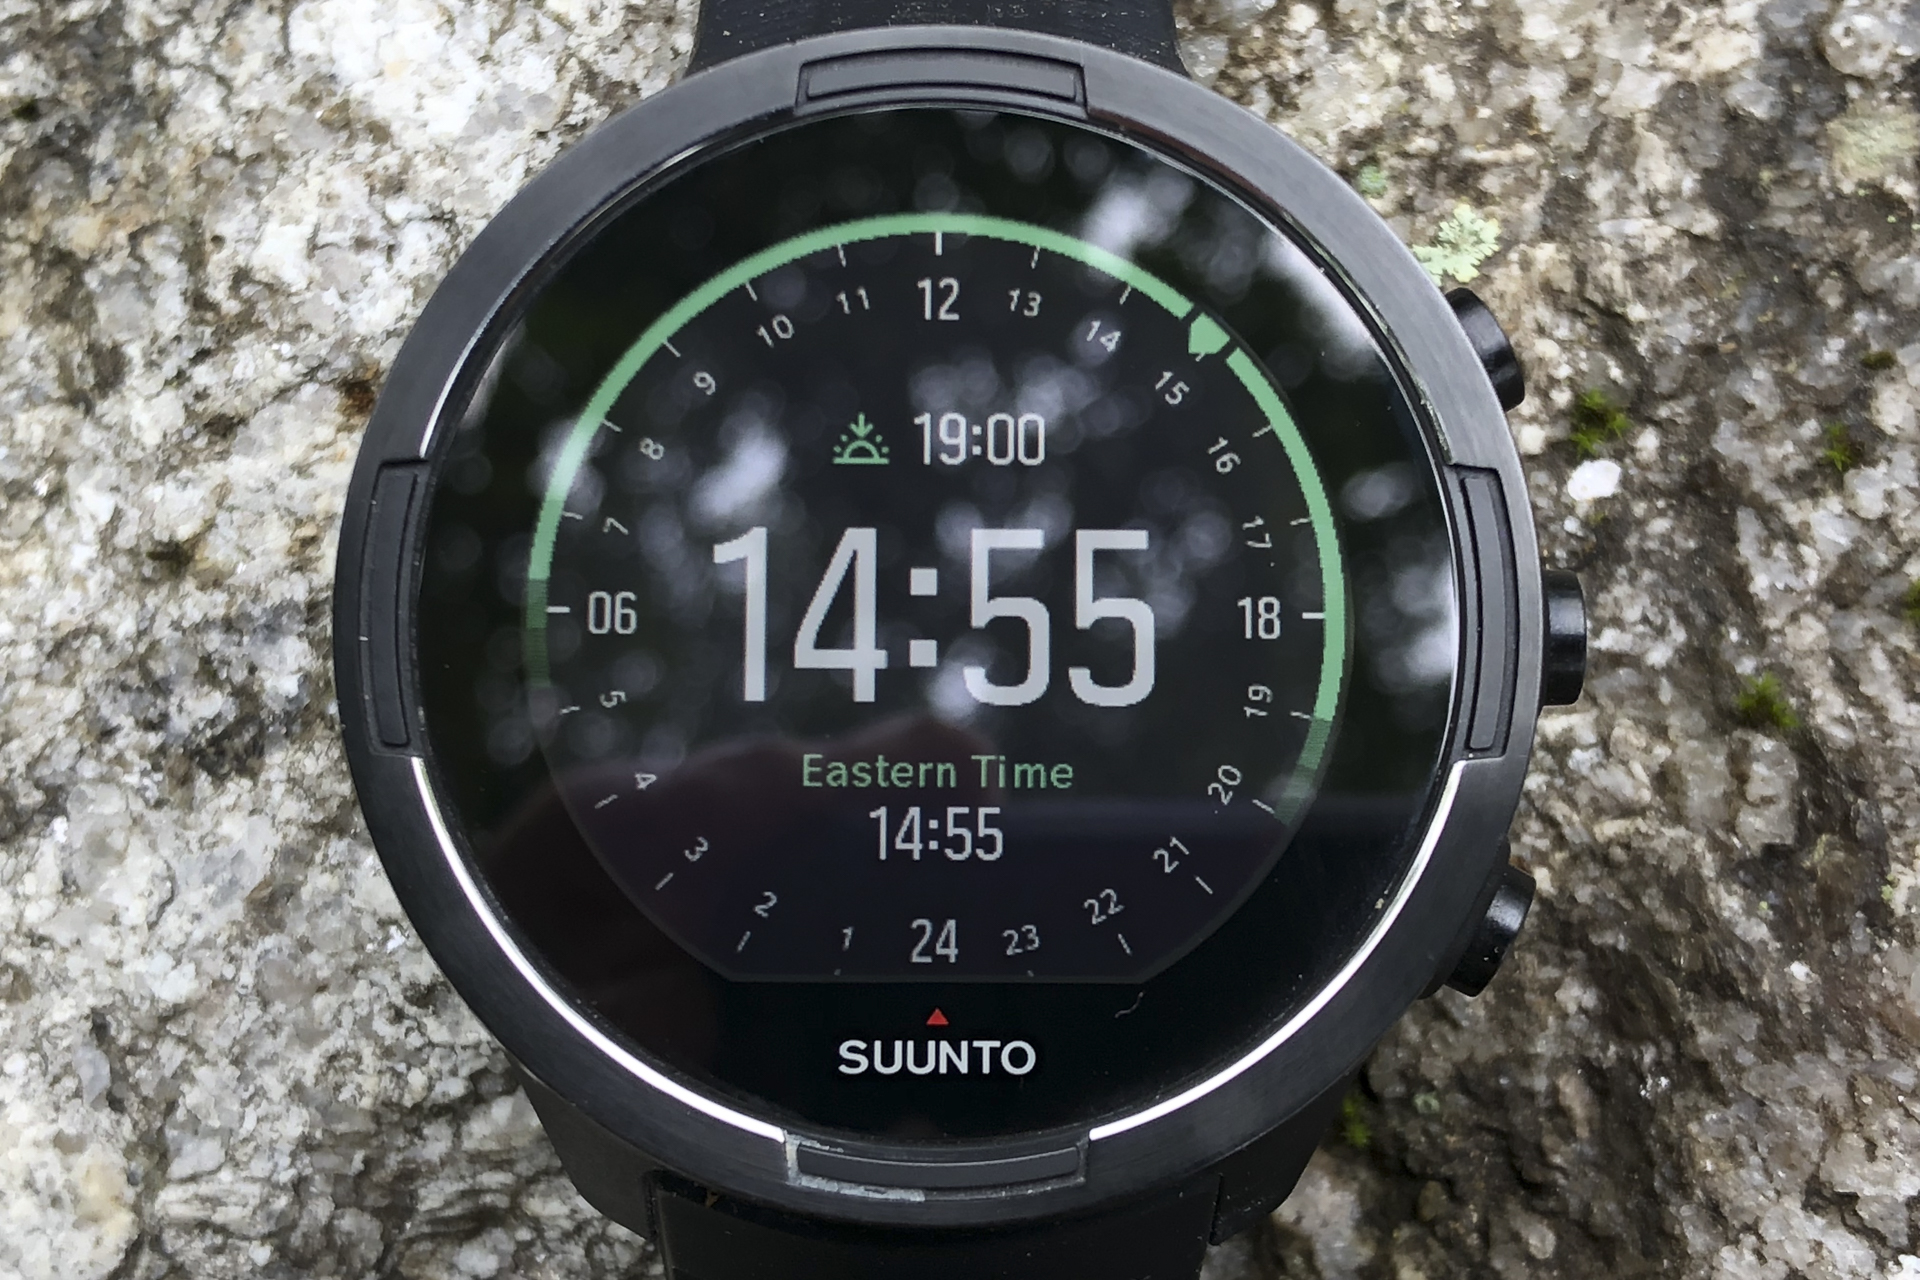 Chat suunto support D5